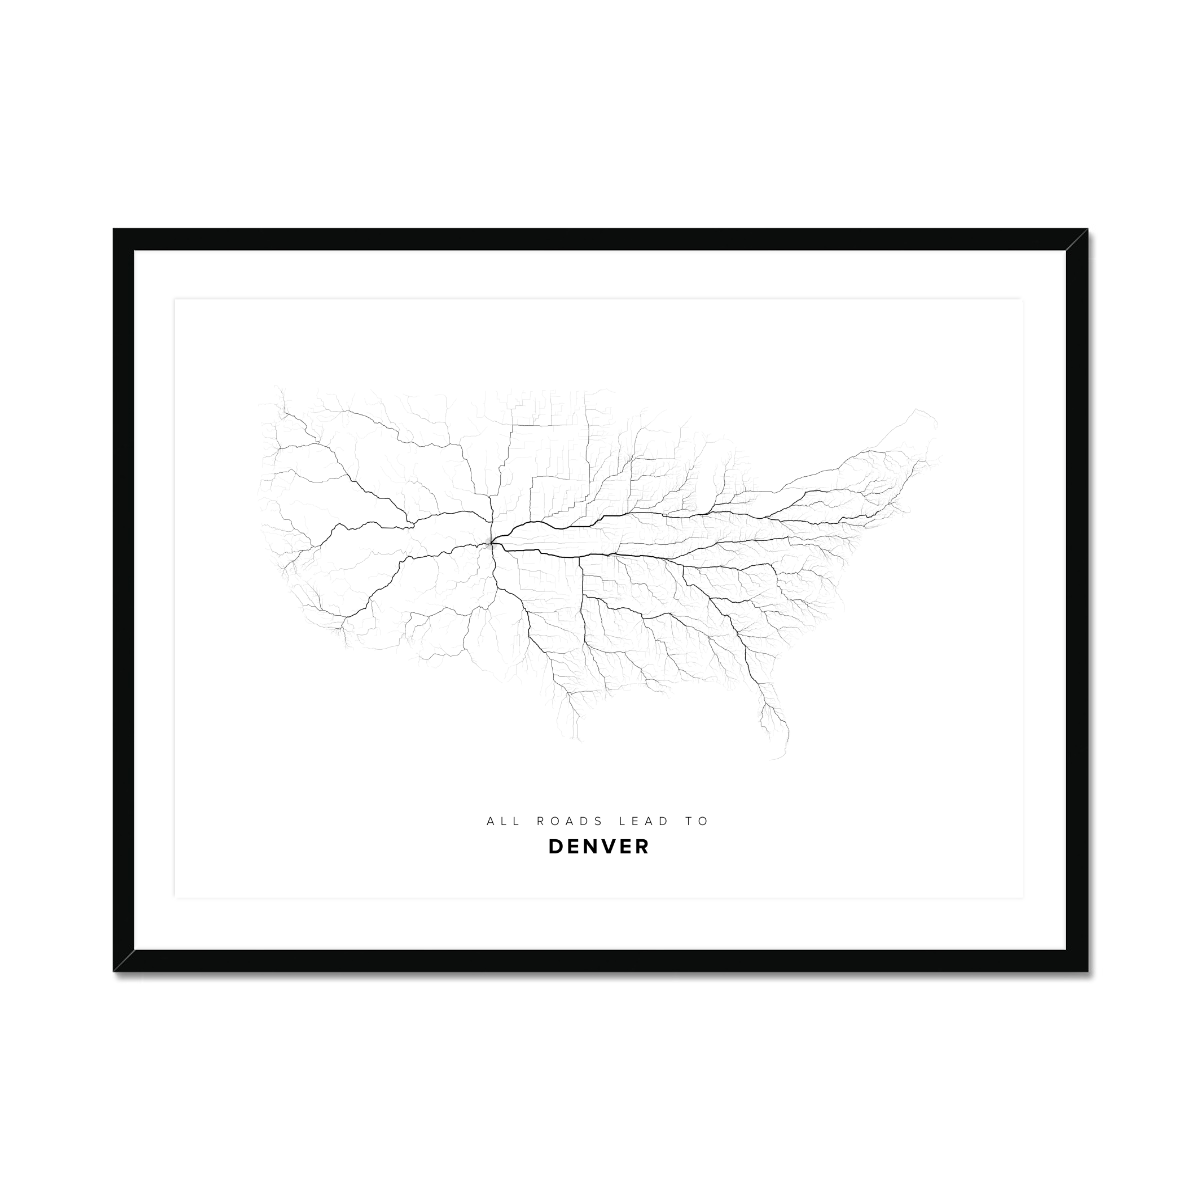 All roads lead to Denver (United States of America) Fine Art Map Print